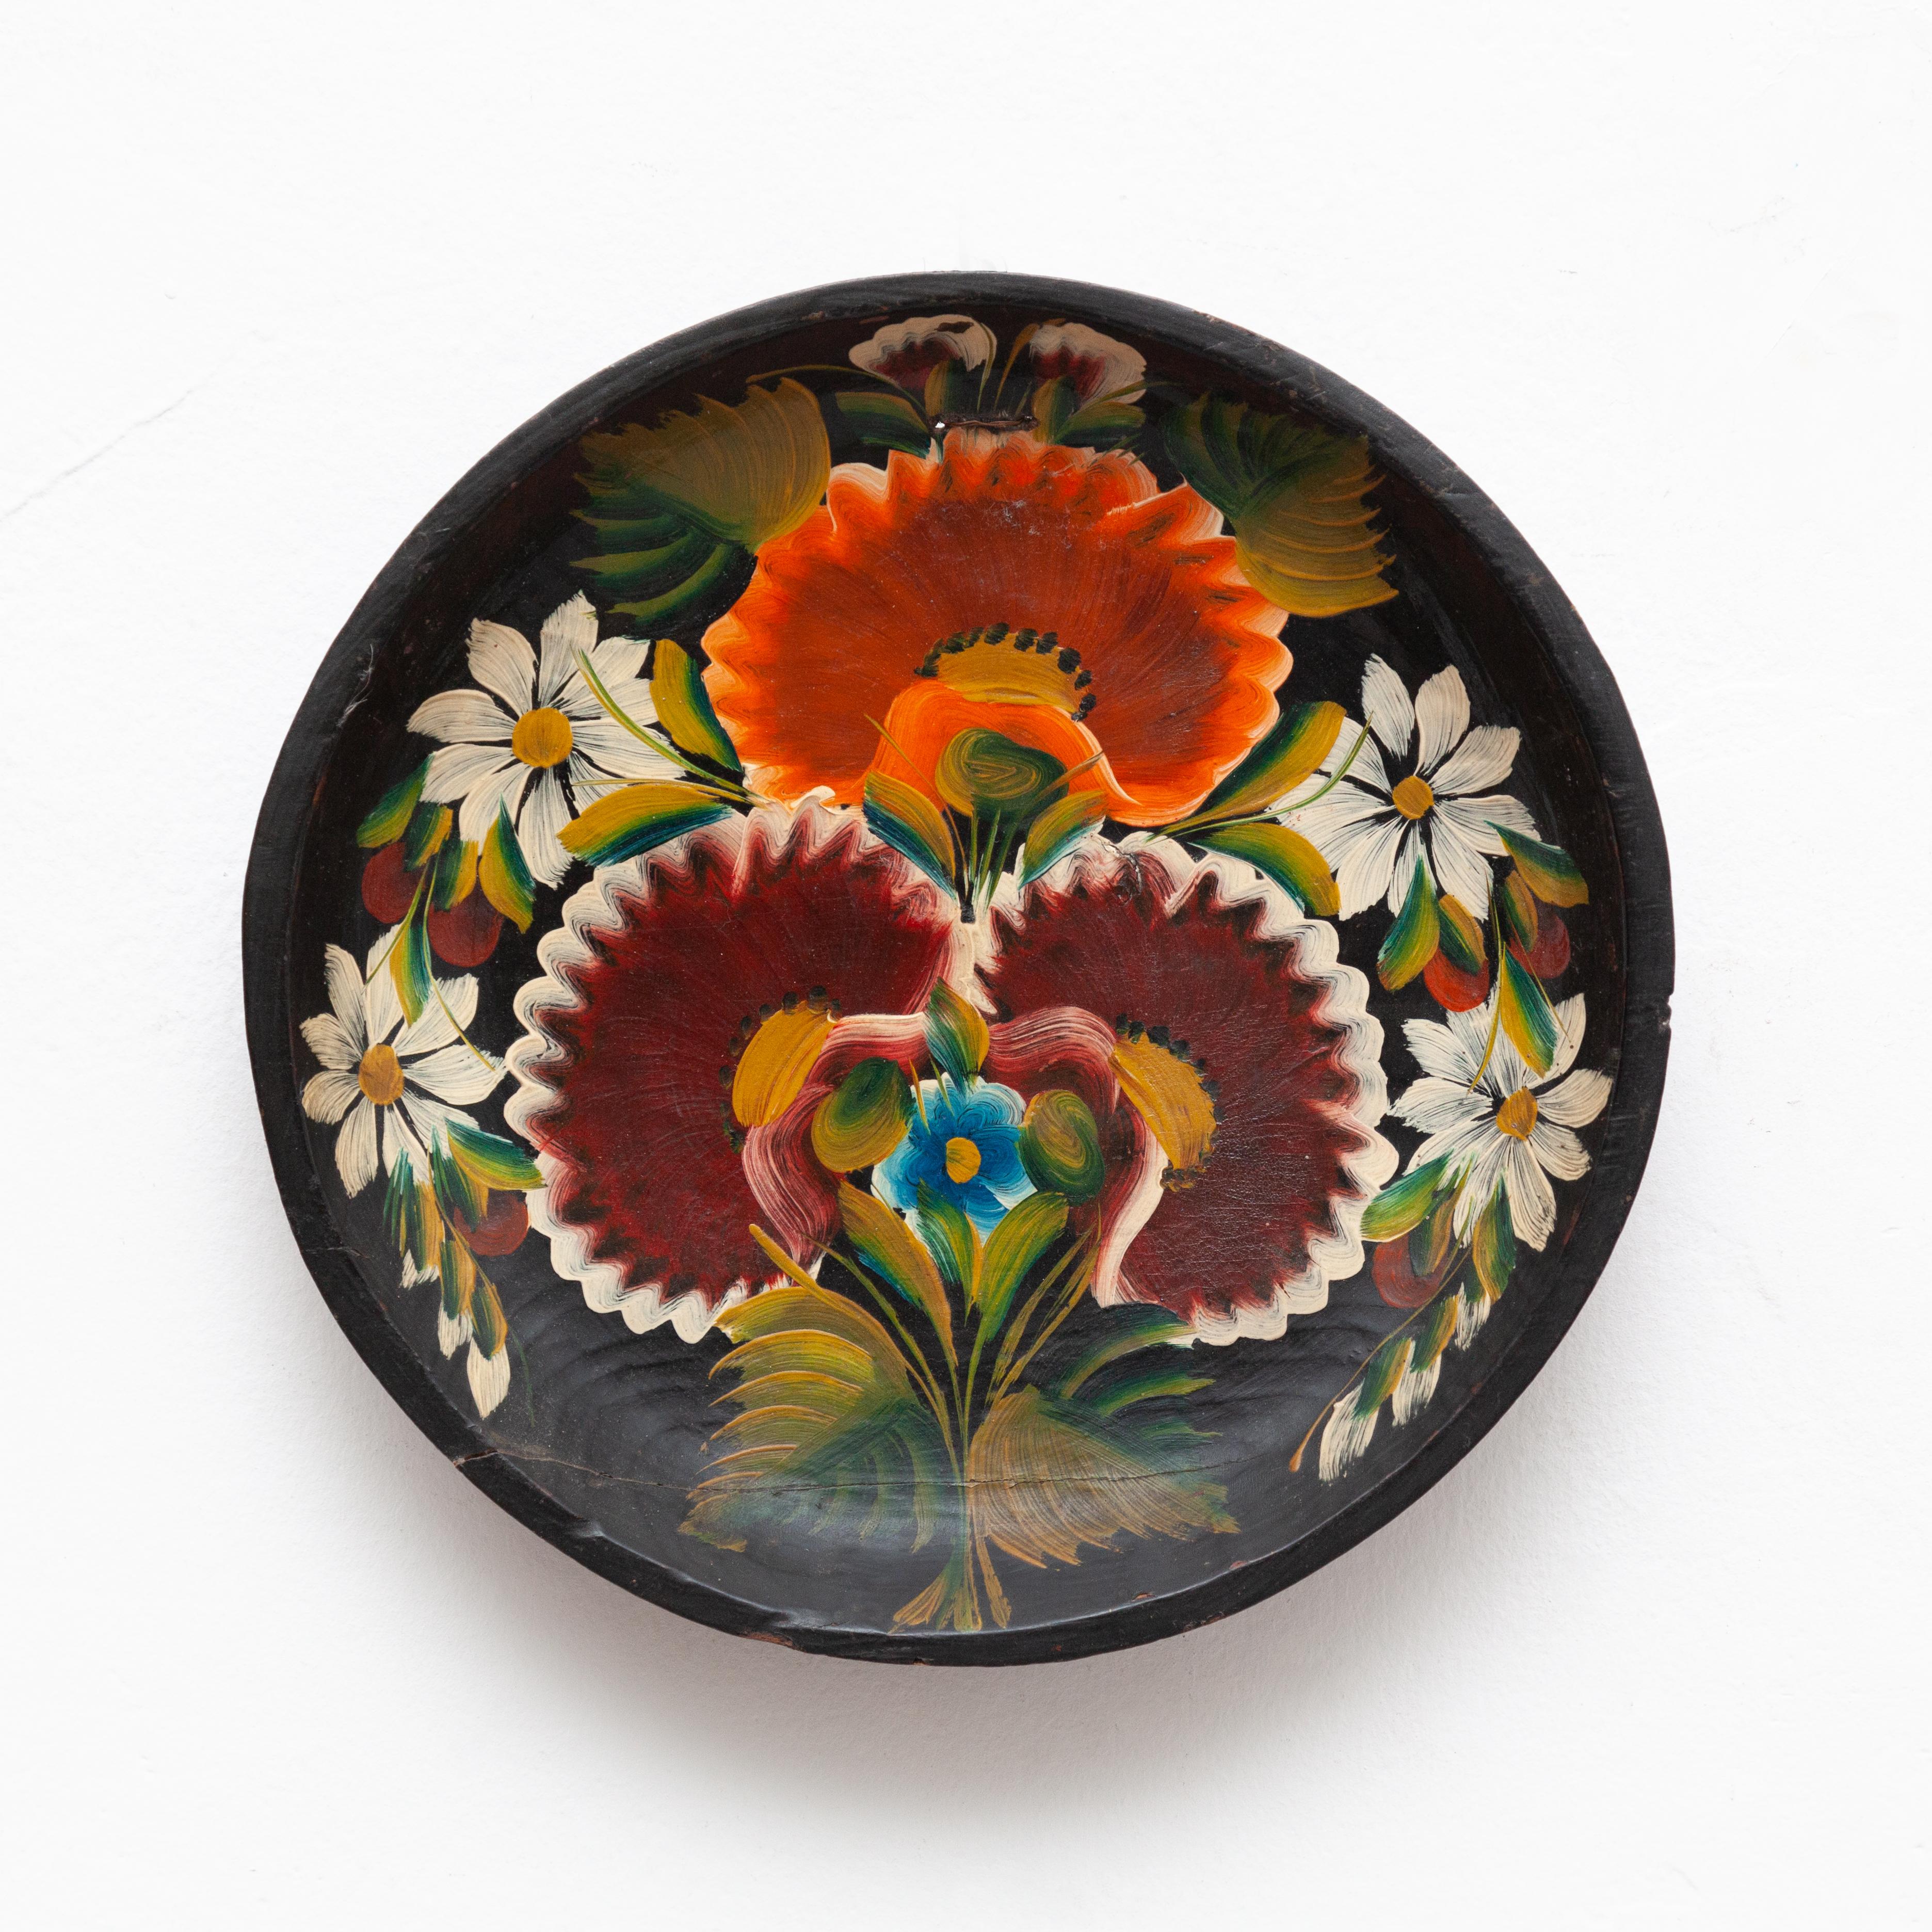 Wooden hand painted plate artwork, circa 1960.

In original condition, with minor wear consistent of age and use, preserving a beautiful patina.
 